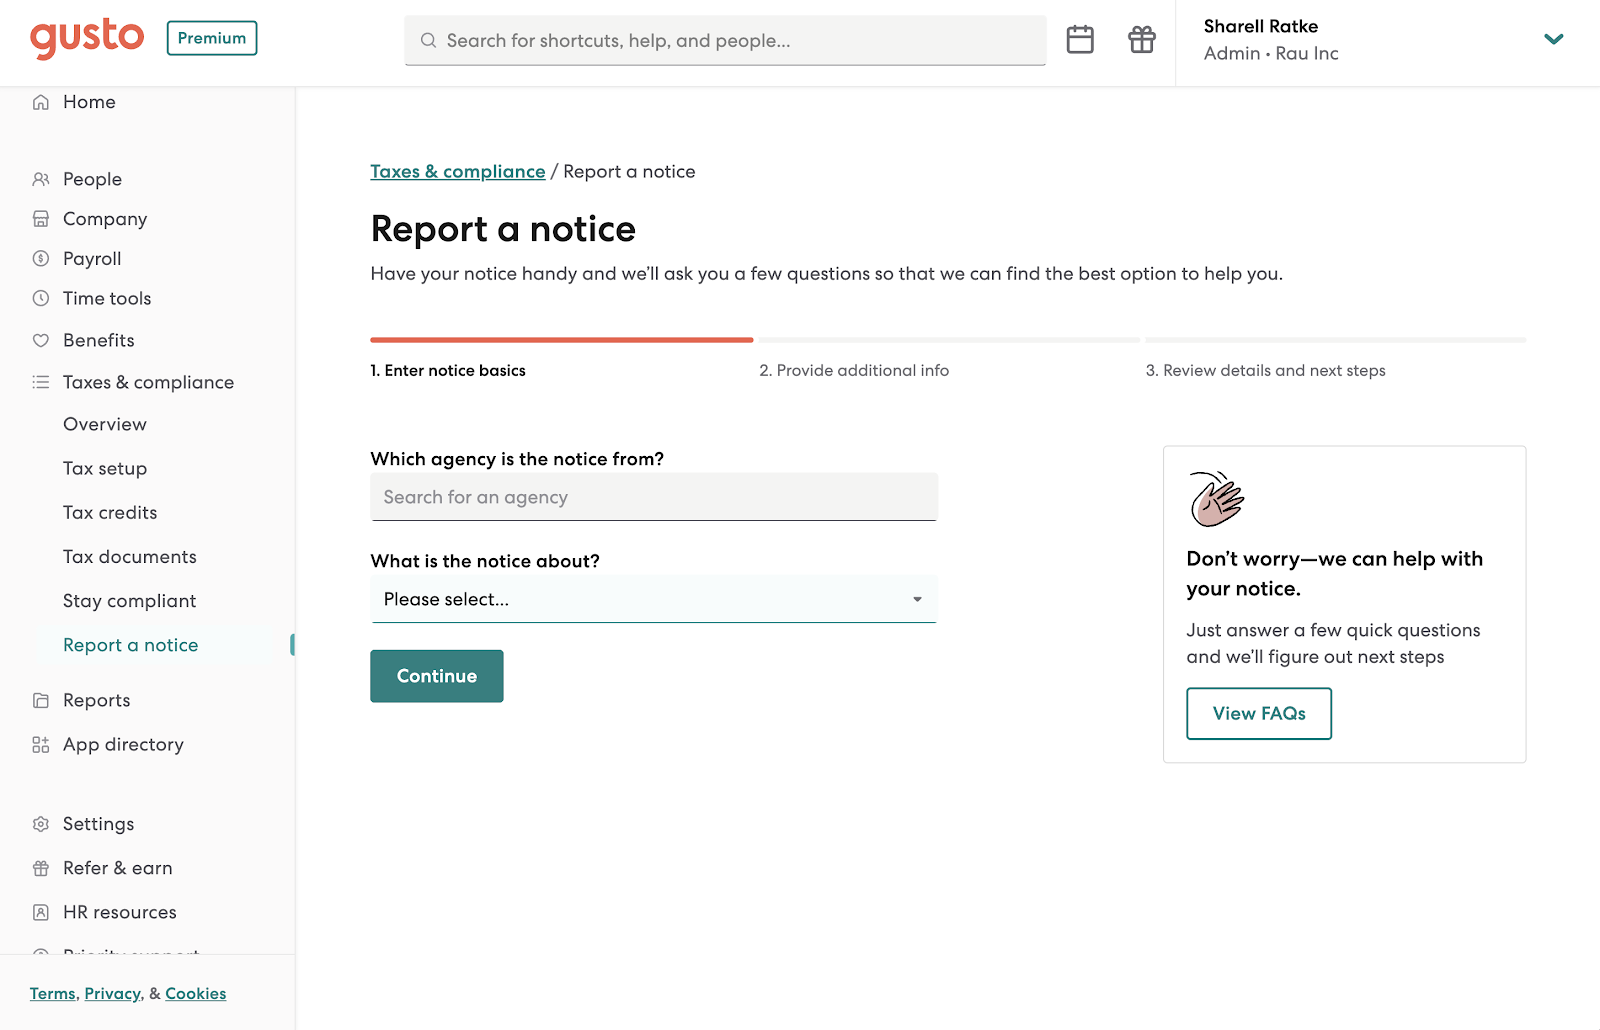 Gusto displays its report a notice dashboard with two questions asking “Which agency is the notice from?” and “What is the notice about?”